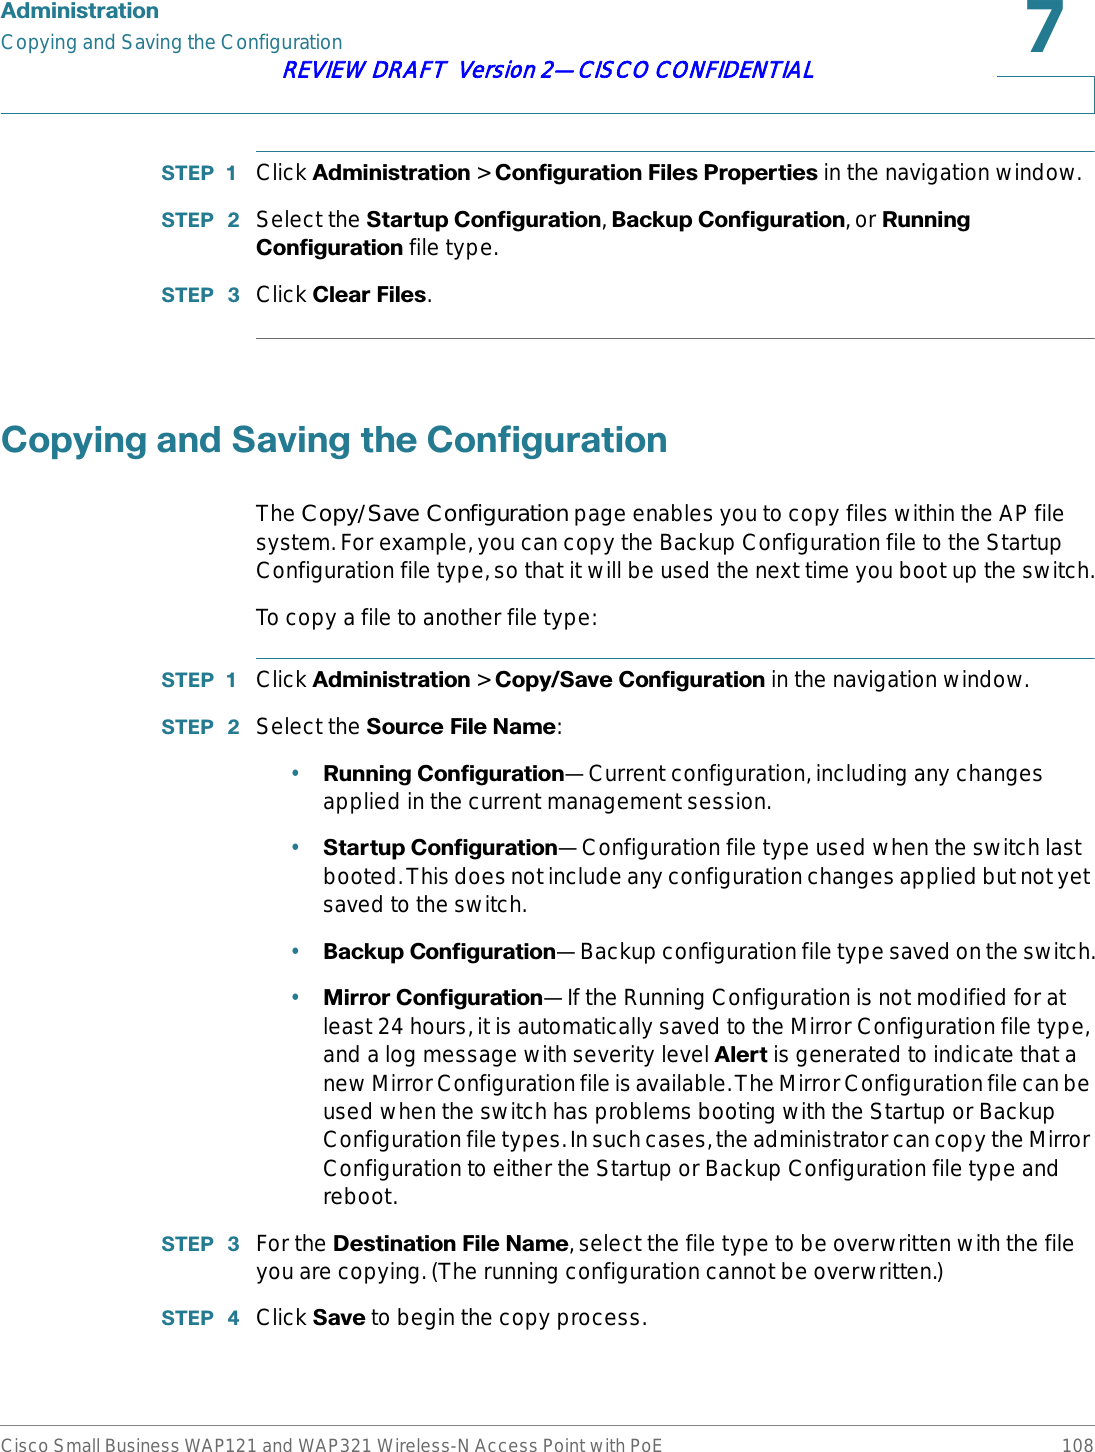 $GPLQLVWUDWLRQCopying and Saving the ConfigurationCisco Small Business WAP121 and WAP321 Wireless-N Access Point with PoE 108REVIEW DRAFT  Version 2—CISCO CONFIDENTIAL67(3  Click $GPLQLVWUDWLRQ &gt; &amp;RQILJXUDWLRQ)LOHV3URSHUWLHVin the navigation window. 67(3  Select the 6WDUWXS&amp;RQILJXUDWLRQ,%DFNXS&amp;RQILJXUDWLRQ, or 5XQQLQJ&amp;RQILJXUDWLRQ file type.67(3  Click &amp;OHDU)LOHV.&amp;RS\LQJDQG6DYLQJWKH&amp;RQILJXUDWLRQThe Copy/Save Configuration page enables you to copy files within the AP file system. For example, you can copy the Backup Configuration file to the Startup Configuration file type, so that it will be used the next time you boot up the switch.To copy a file to another file type:67(3  Click $GPLQLVWUDWLRQ &gt; &amp;RS\6DYH&amp;RQILJXUDWLRQin the navigation window. 67(3  Select the 6RXUFH)LOH1DPH:•5XQQLQJ&amp;RQILJXUDWLRQ—Current configuration, including any changes applied in the current management session.•6WDUWXS&amp;RQILJXUDWLRQ—Configuration file type used when the switch last booted. This does not include any configuration changes applied but not yet saved to the switch.•%DFNXS&amp;RQILJXUDWLRQ—Backup configuration file type saved on the switch.•0LUURU&amp;RQILJXUDWLRQ—If the Running Configuration is not modified for at least 24 hours, it is automatically saved to the Mirror Configuration file type, and a log message with severity level $OHUW is generated to indicate that a new Mirror Configuration file is available. The Mirror Configuration file can be used when the switch has problems booting with the Startup or Backup Configuration file types. In such cases, the administrator can copy the Mirror Configuration to either the Startup or Backup Configuration file type and reboot.67(3  For the &apos;HVWLQDWLRQ)LOH1DPH, select the file type to be overwritten with the file you are copying. (The running configuration cannot be overwritten.)67(3  Click 6DYH to begin the copy process.